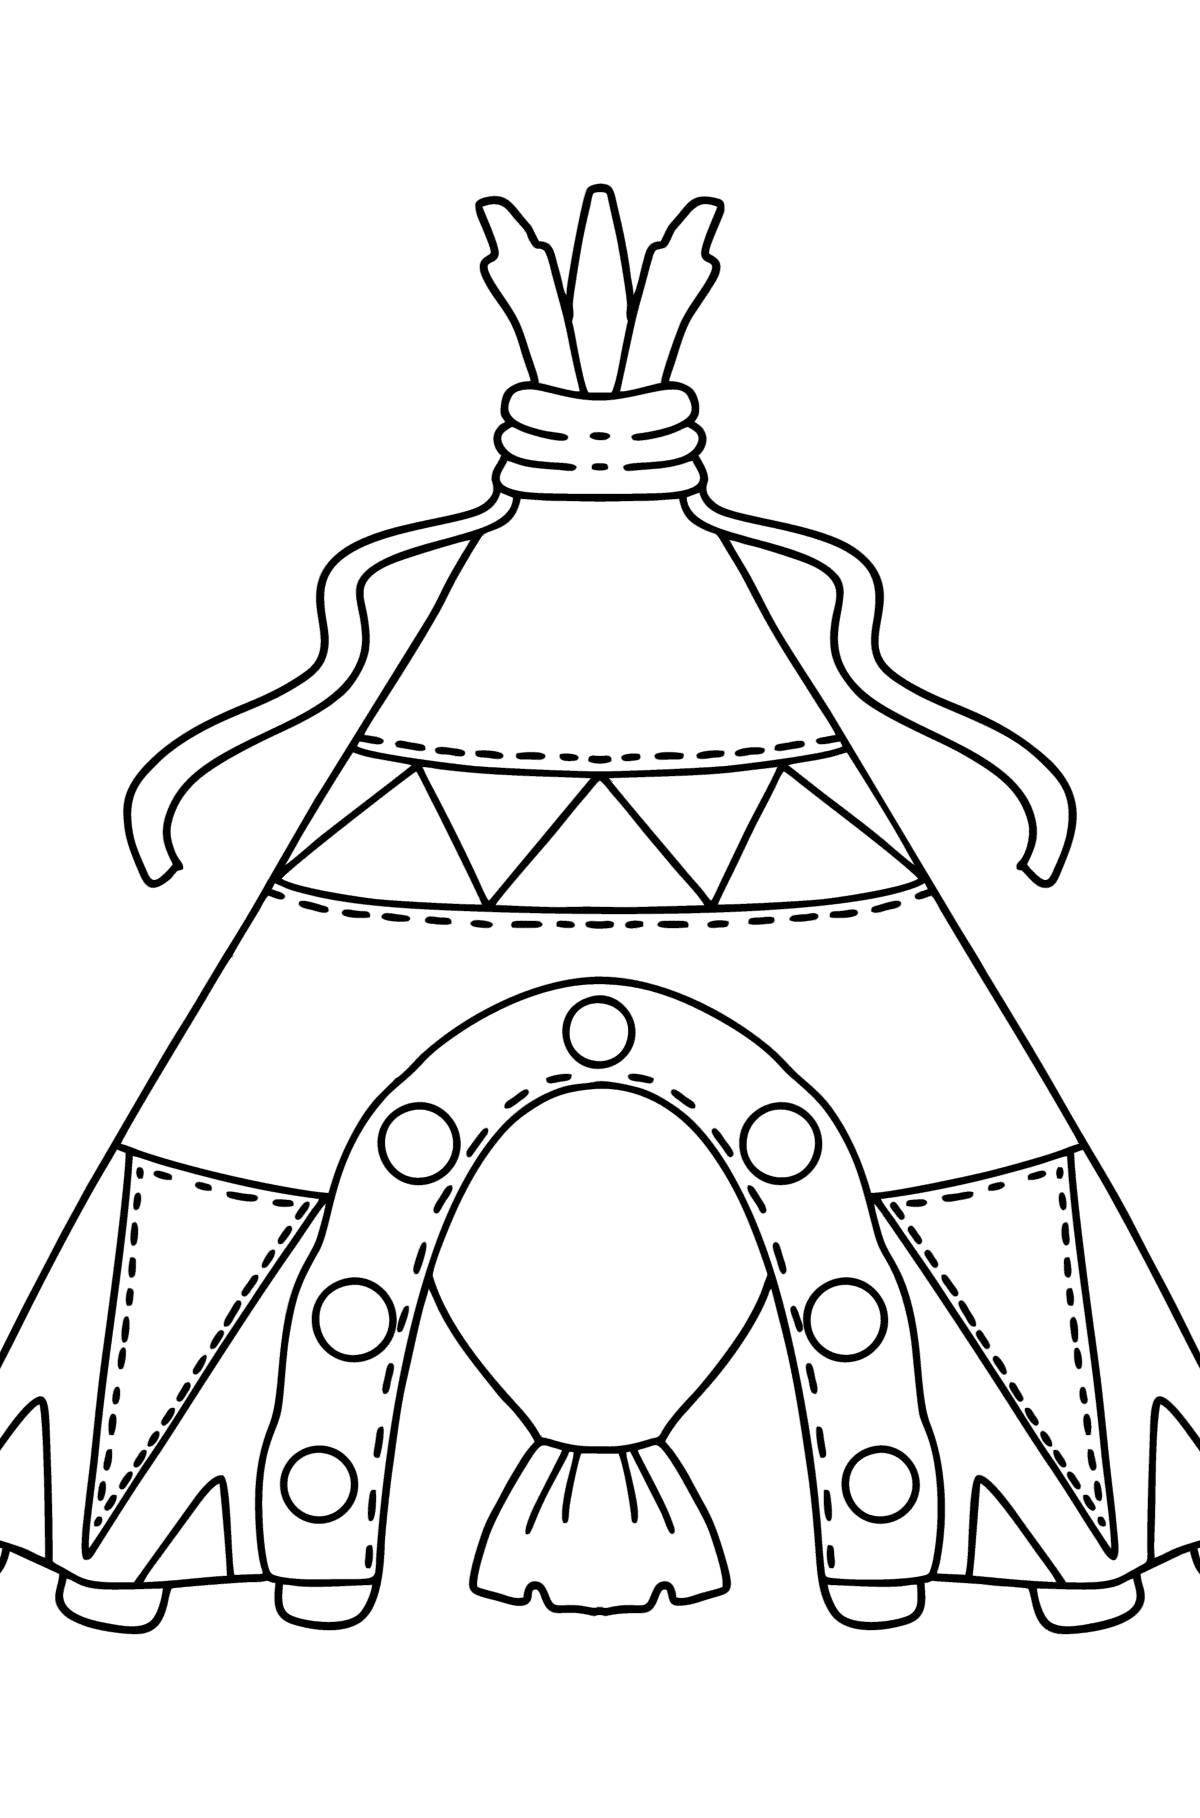 Colorful wigwam coloring page